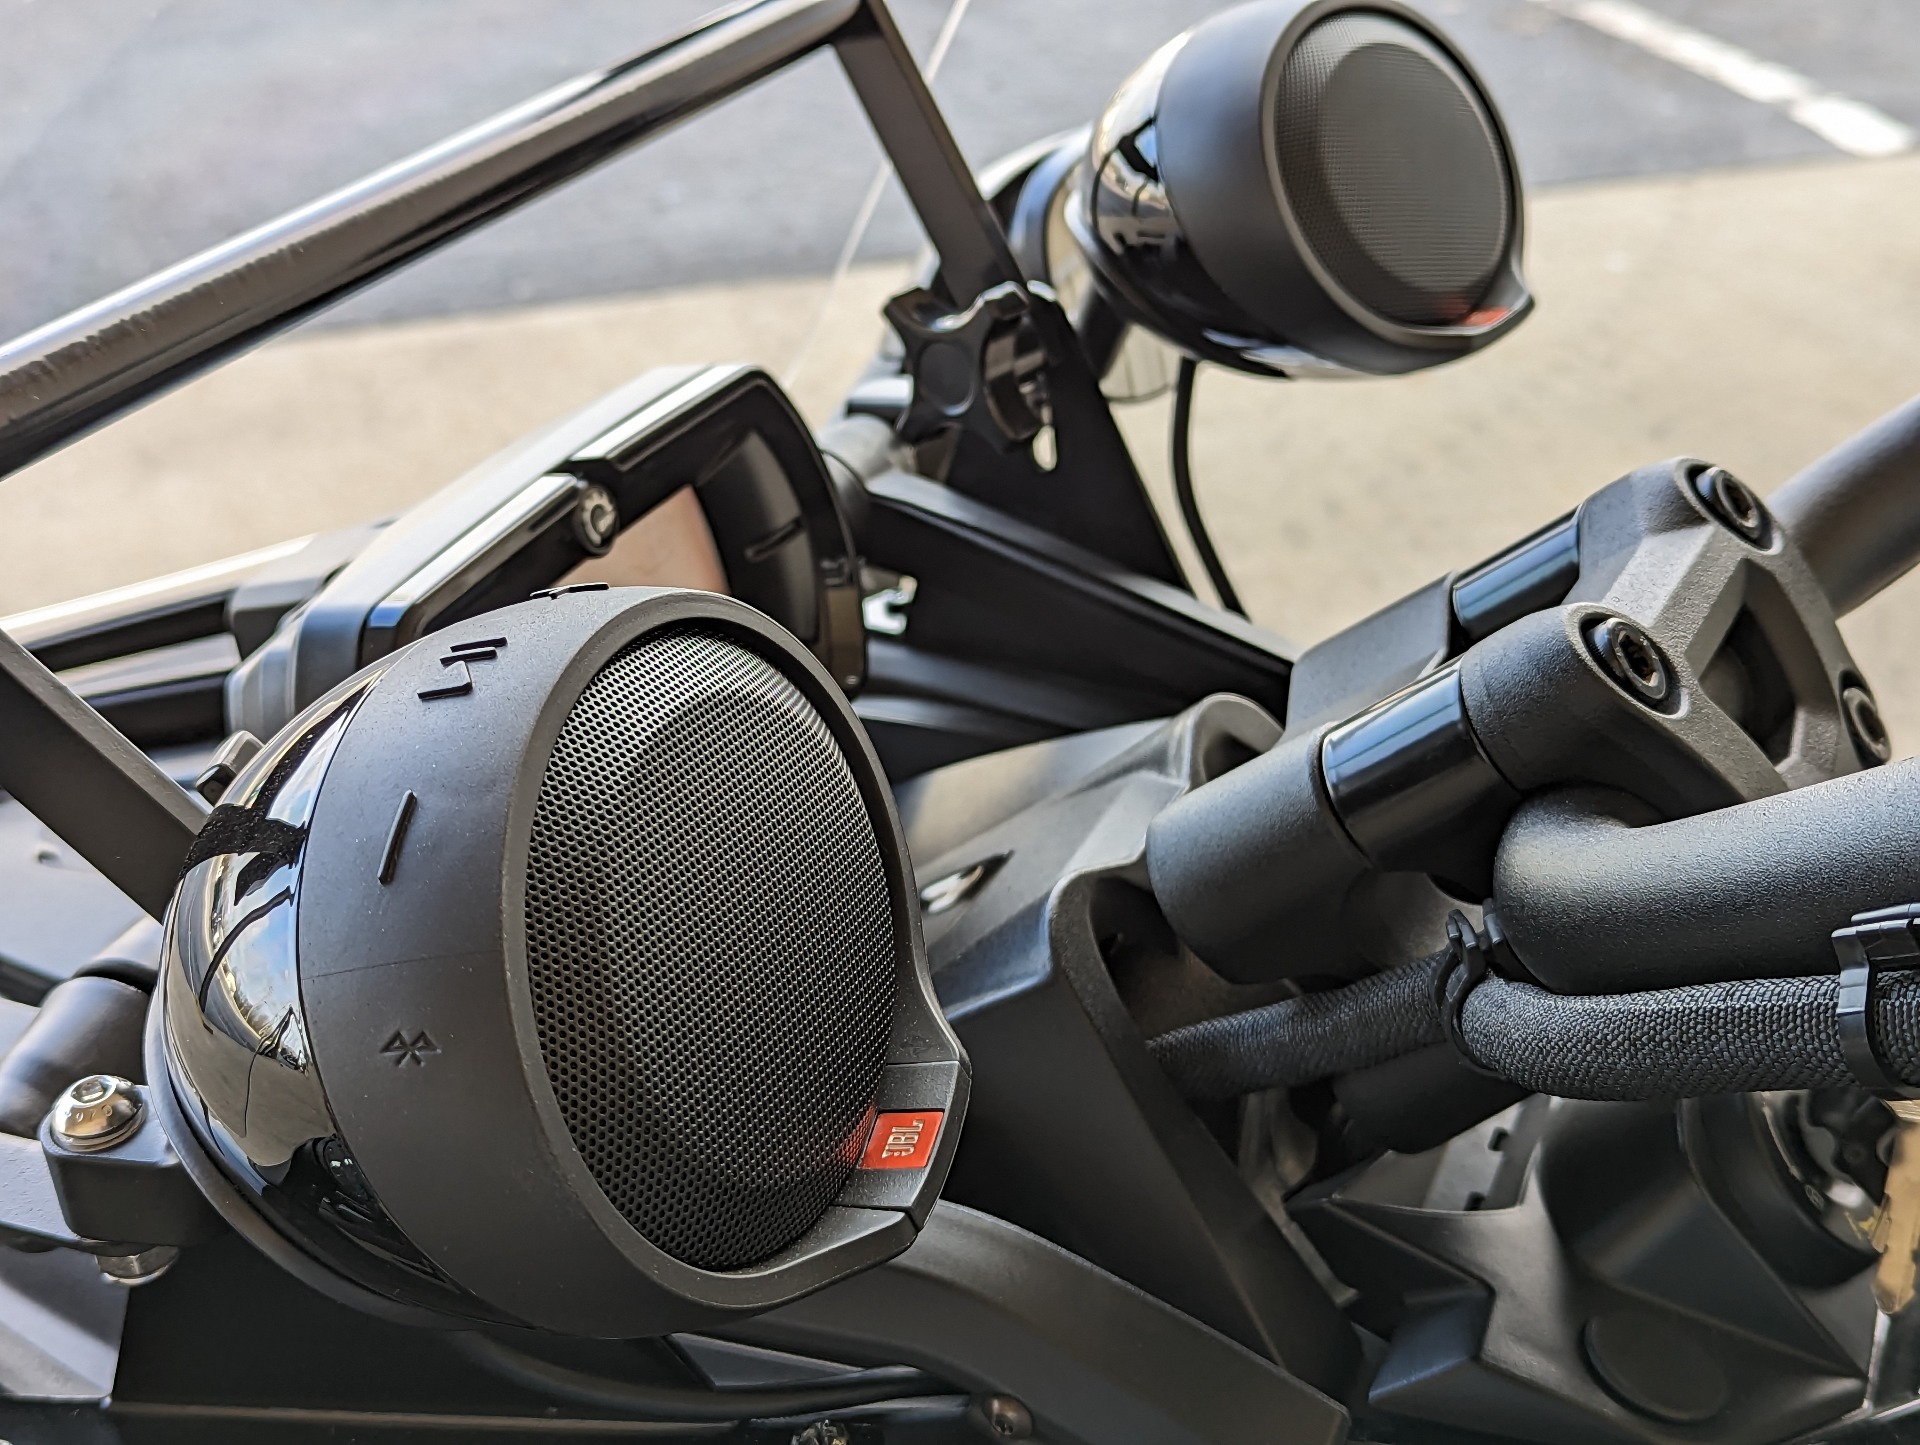 2020 Can-Am Spyder F3-S SE6 in Winchester, Tennessee - Photo 9